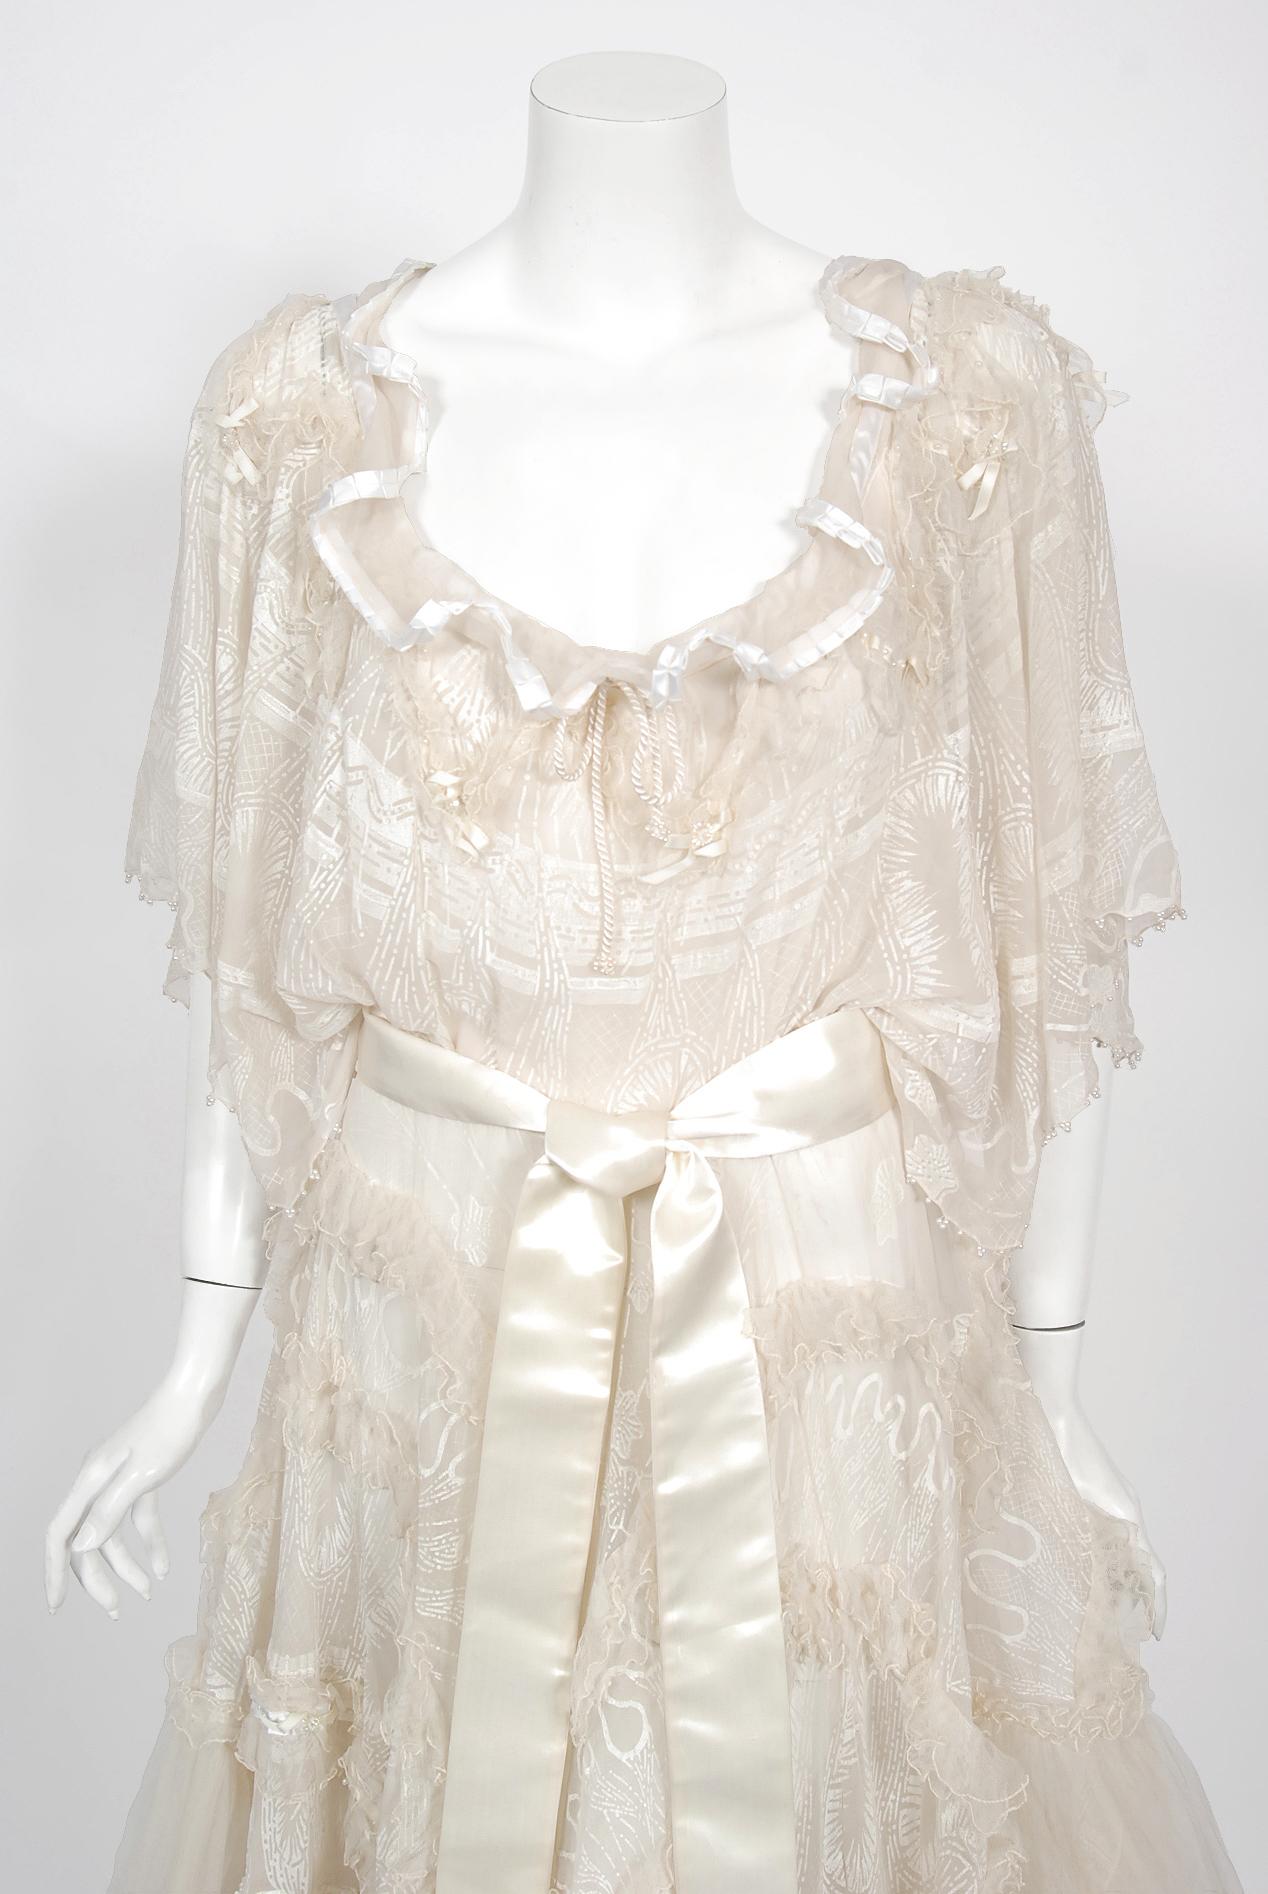 An ethereal and truly iconic Zandra Rhodes hand-painted sheer silk chiffon & tiered tulle ivory bridal gown dating back to her 1973 'Shells' couture collection. As shown, a similar version was Princess Anne's choice look for her official 1973